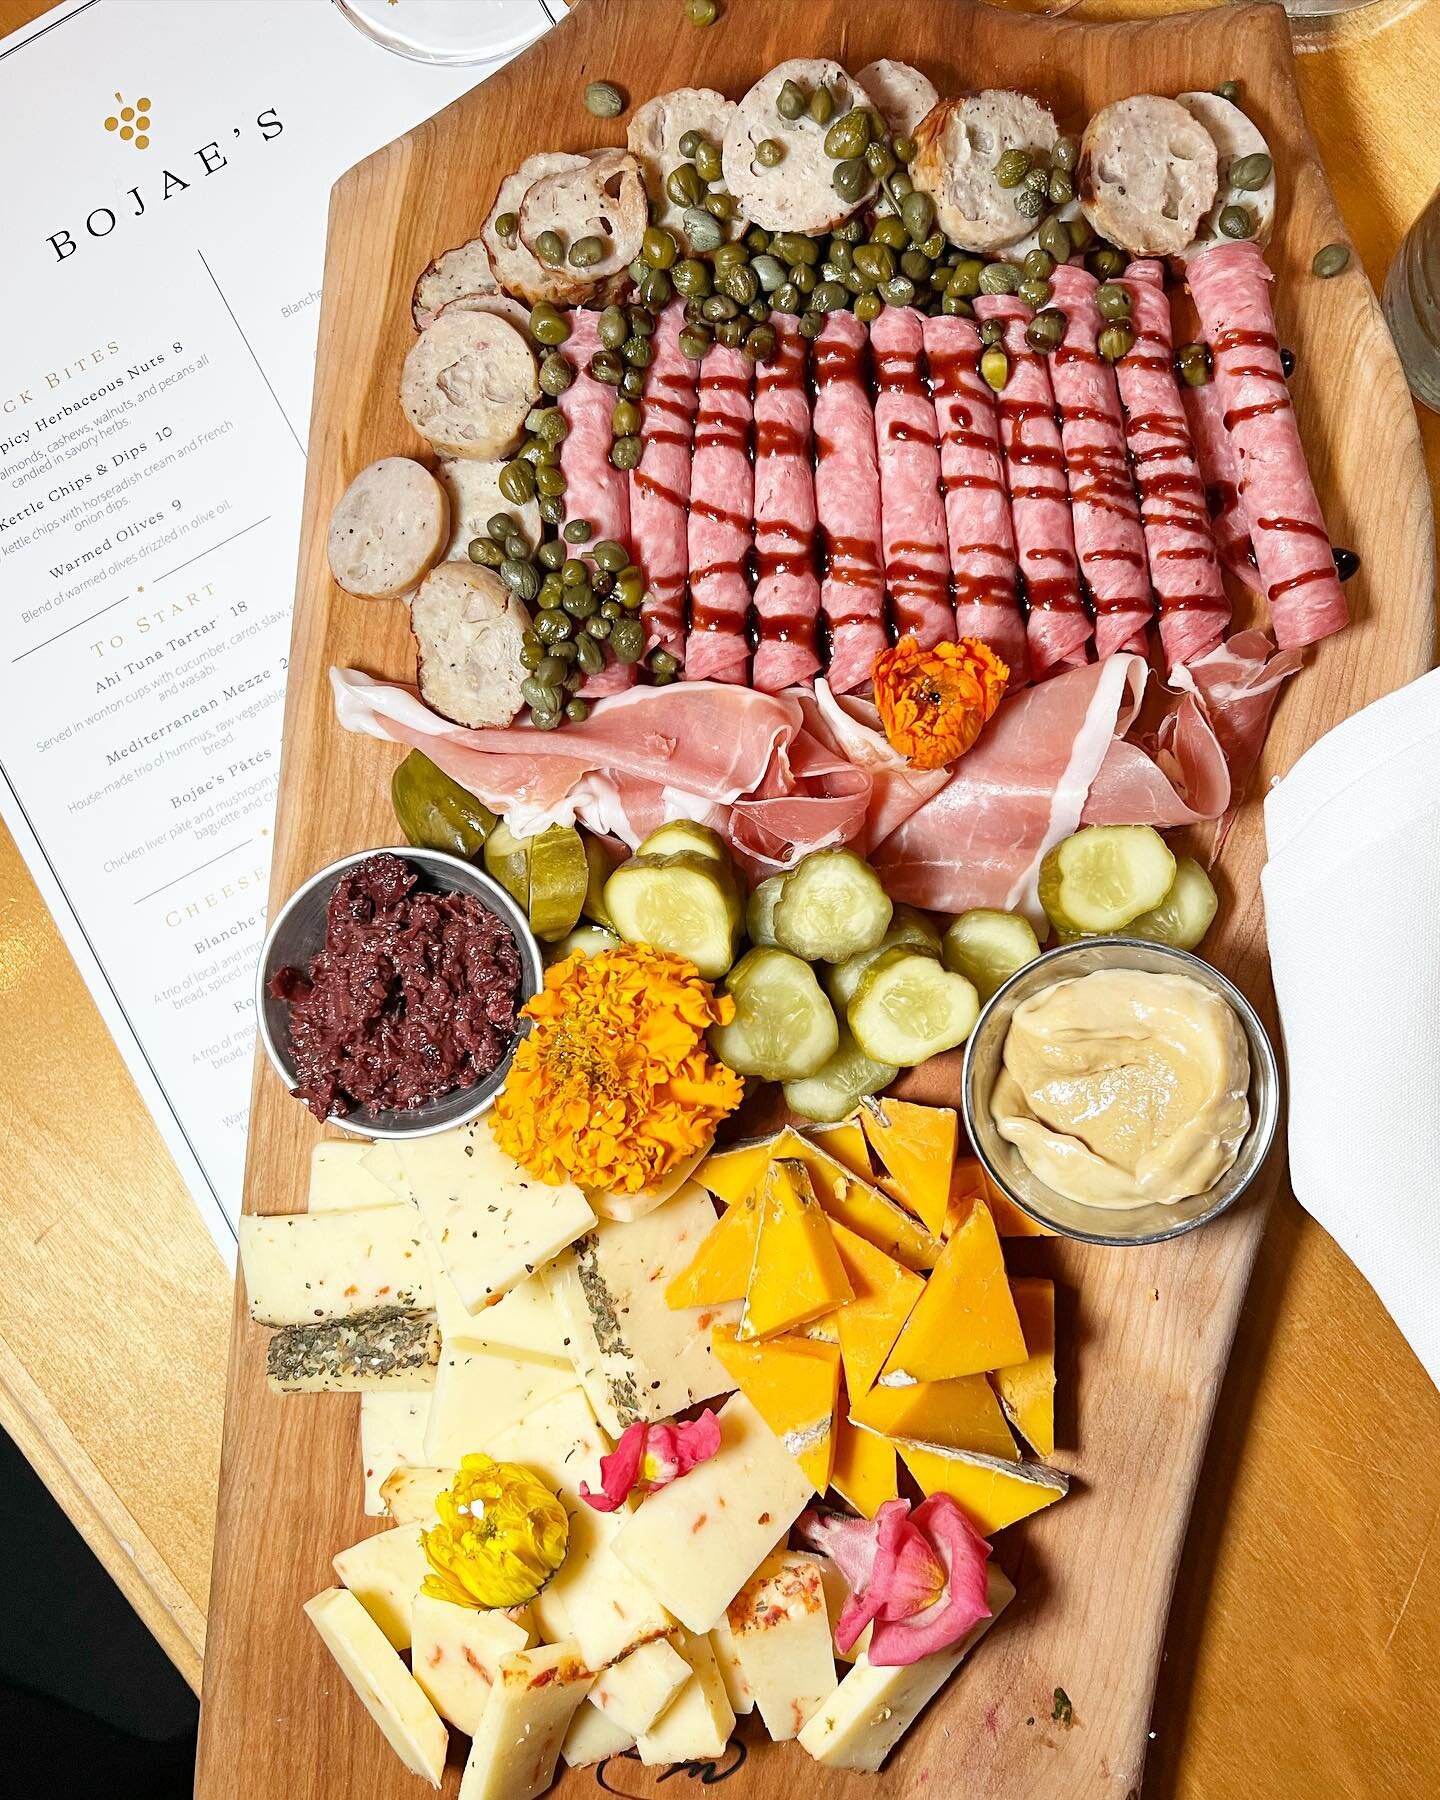 We made it to Friday! It&rsquo;s time to celebrate the weekend ahead with this Rogue cheese &amp; meat board from @bojaes located in the heart of @50thandfrance Edina area 🧀💯😋🫶🏻.
&bull;&bull;&bull;&bull;&bull;&bull;
@bojaes wine bar &amp; bistro